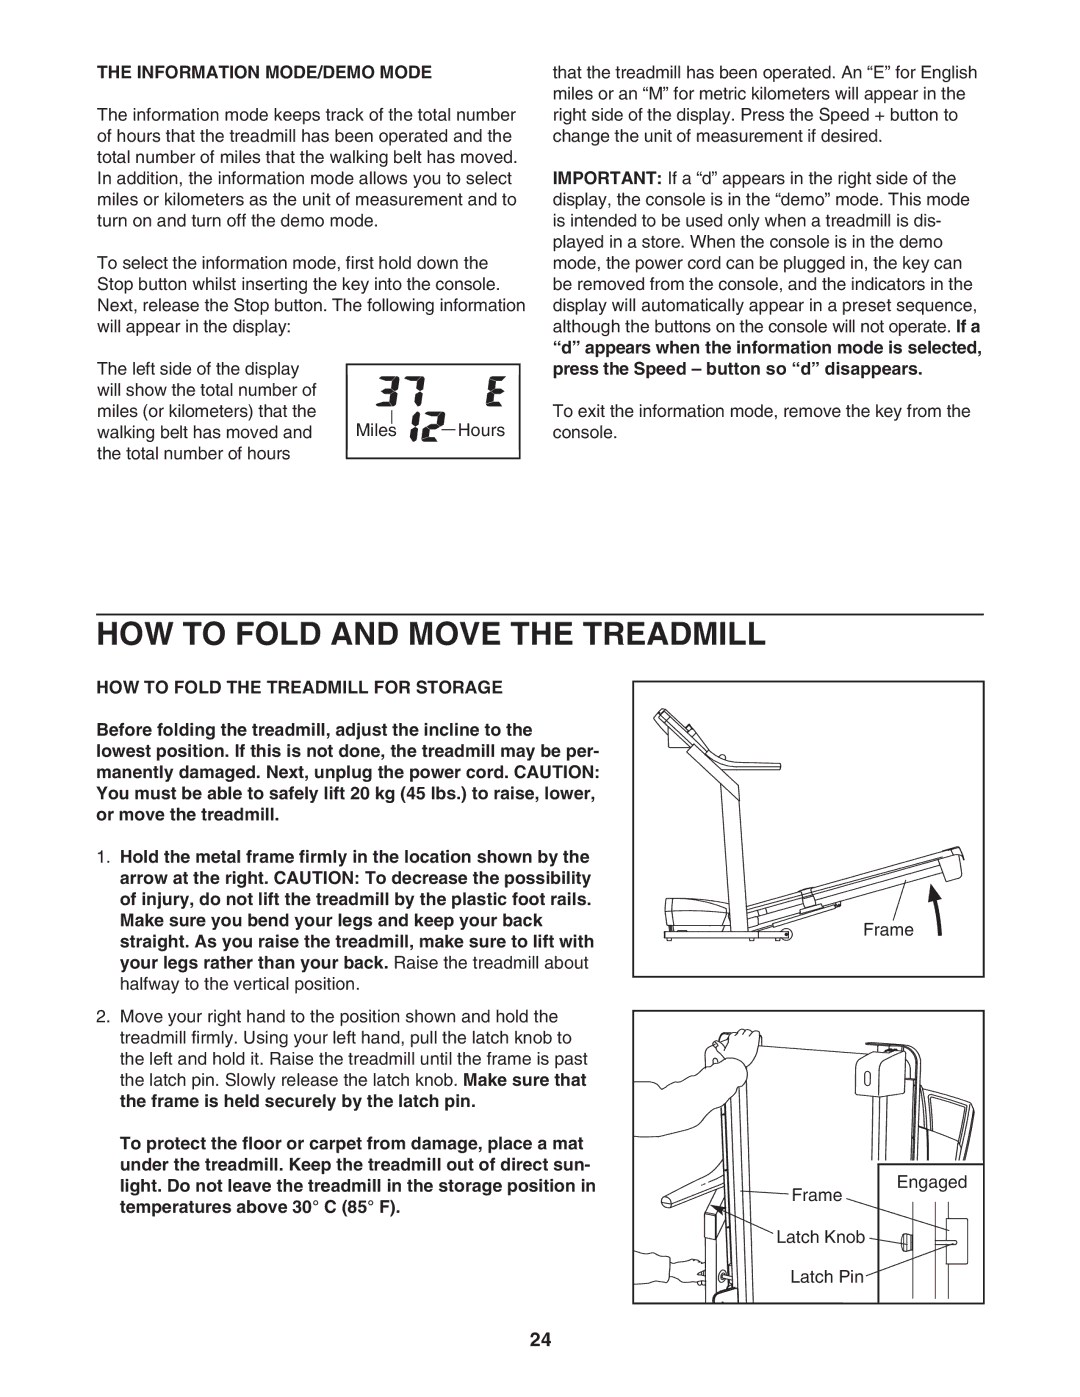 Healthrider HATL51205.0 manual HOW to Fold and Move the Treadmill, Information MODE/DEMO Mode 